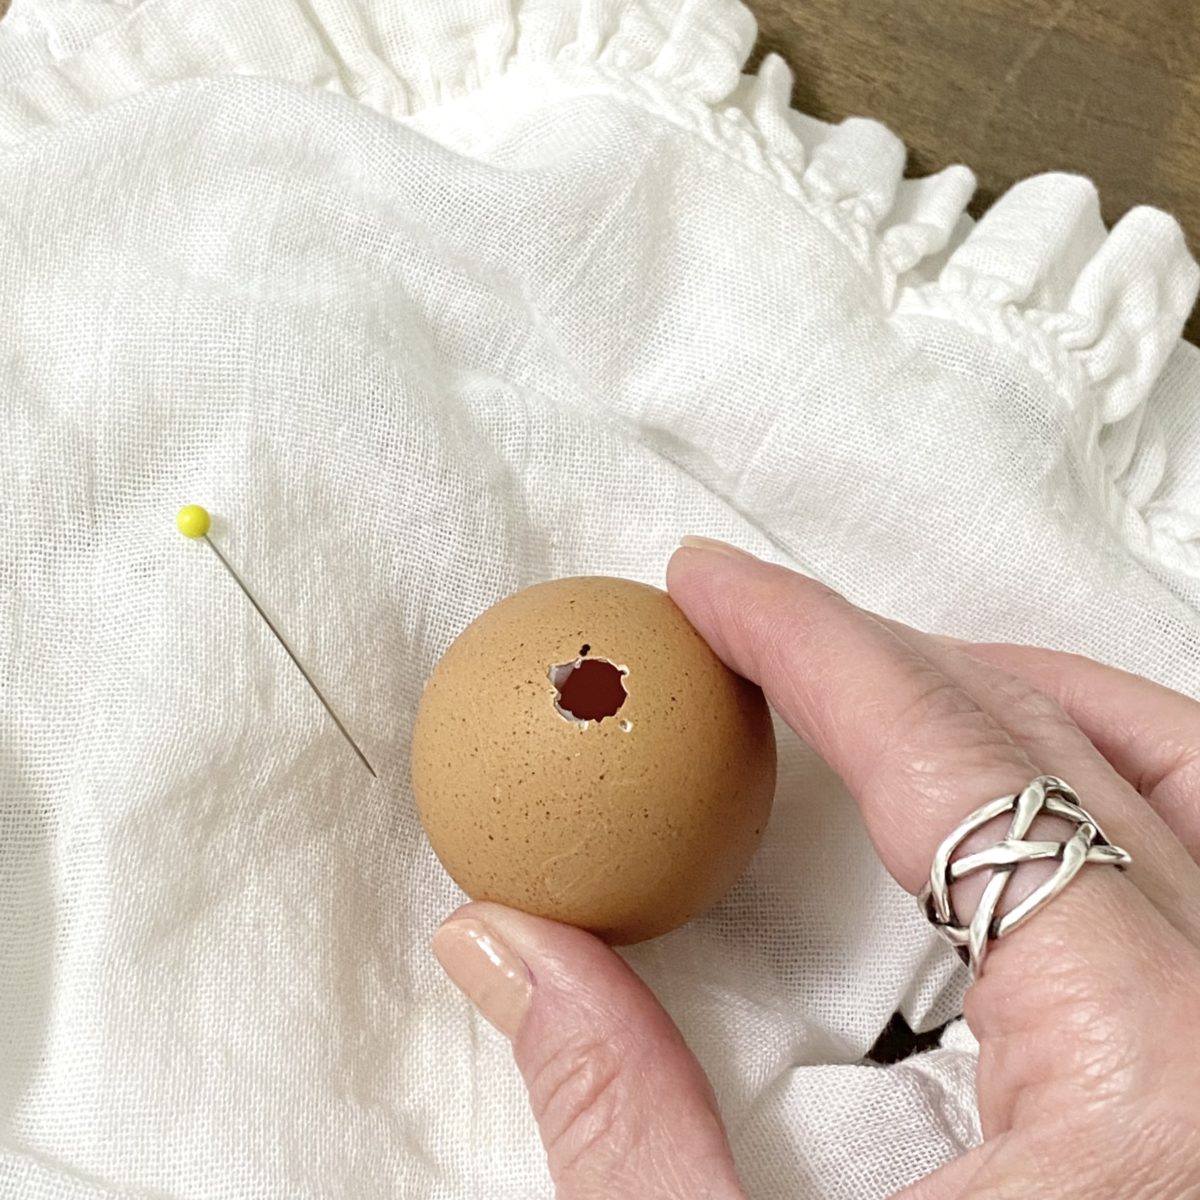 A small hole made in a brown egg using a straight pin.